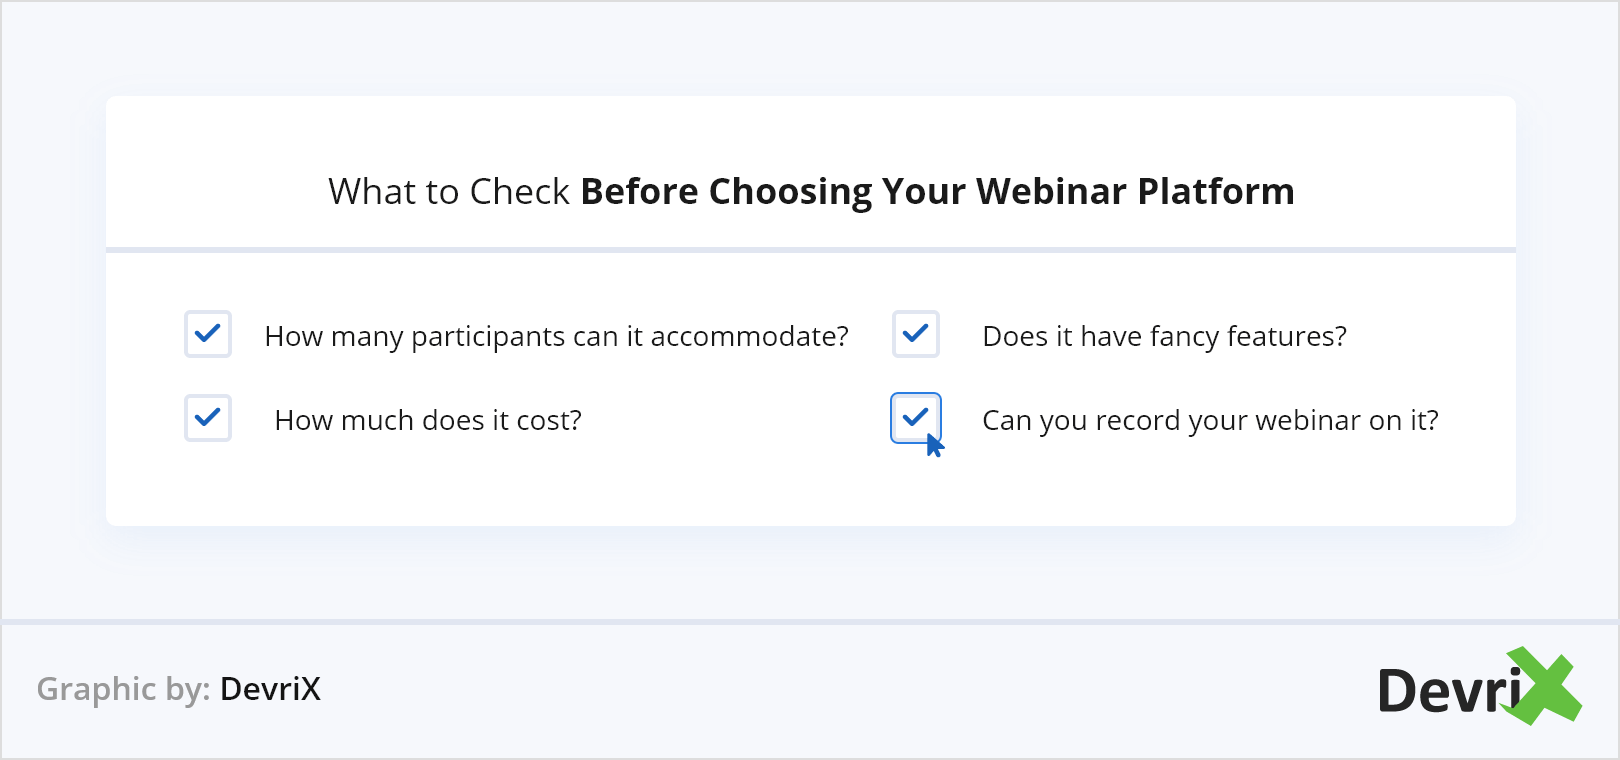 What to Check Before Choosing your Webinar Platform